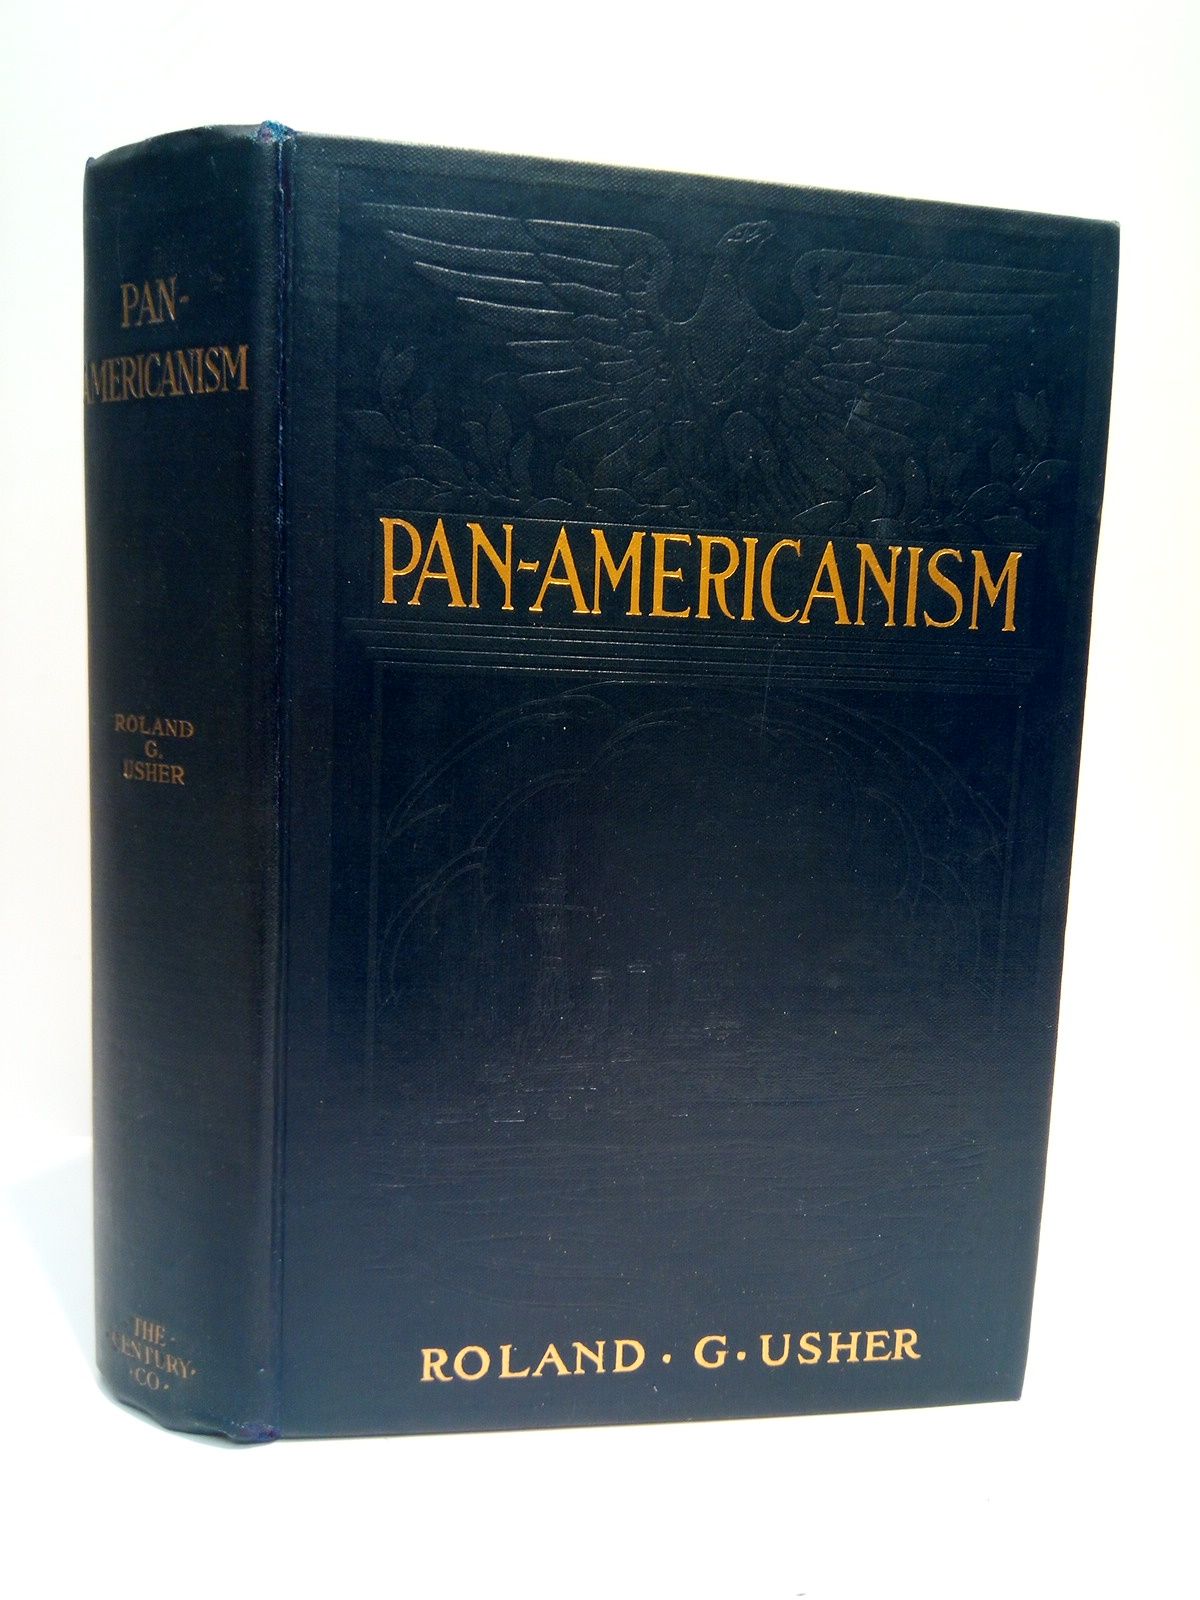 USHER, Roland G. - Pan-Americanism: A forecast of the inevitable clash between the United States and Europe's victor